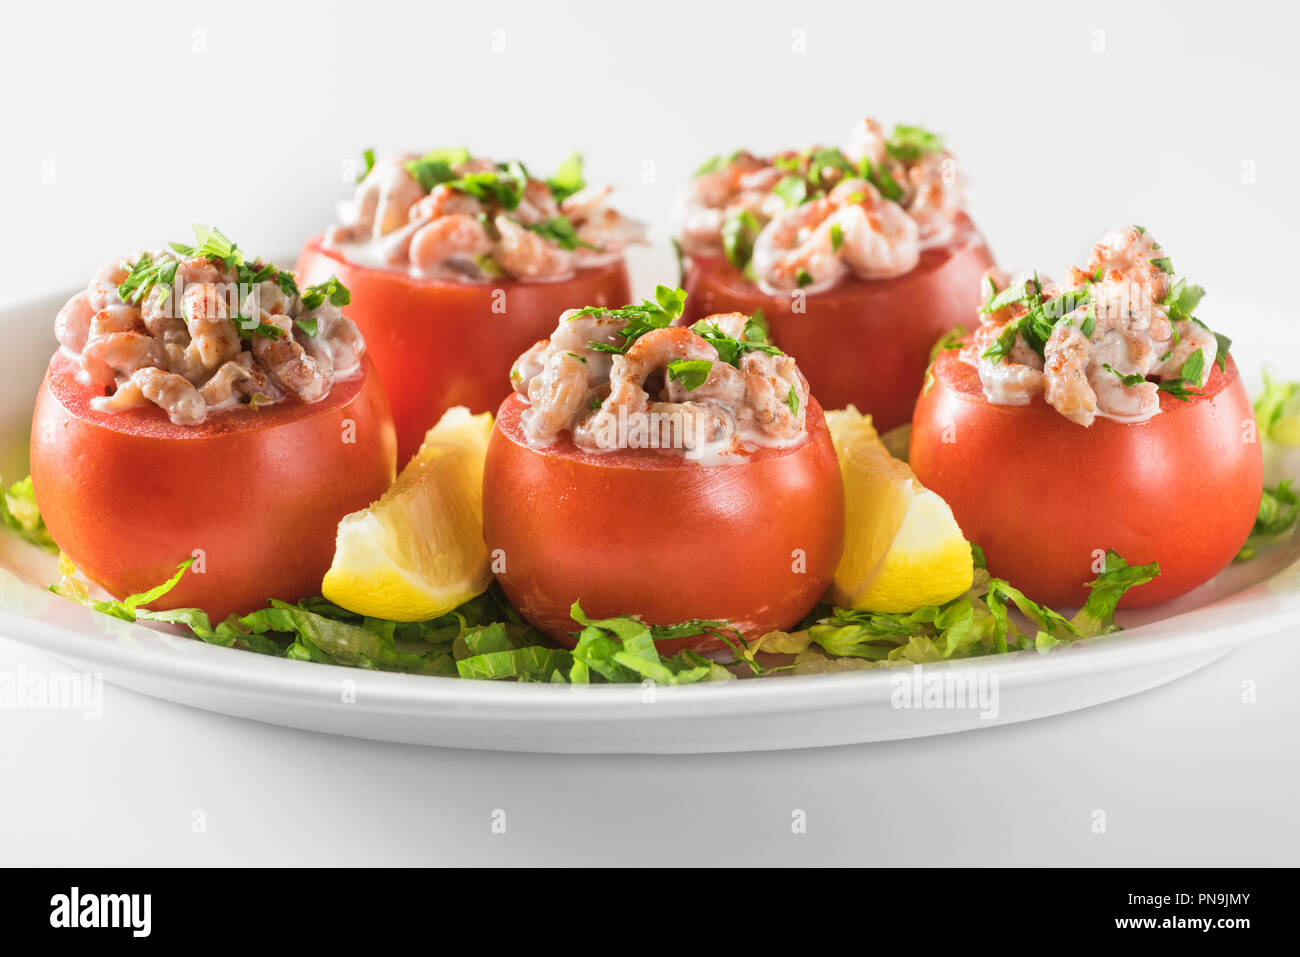 Tomates aux crevettes. Tomatoes filled with prawns. Belgium Food Stock Photo